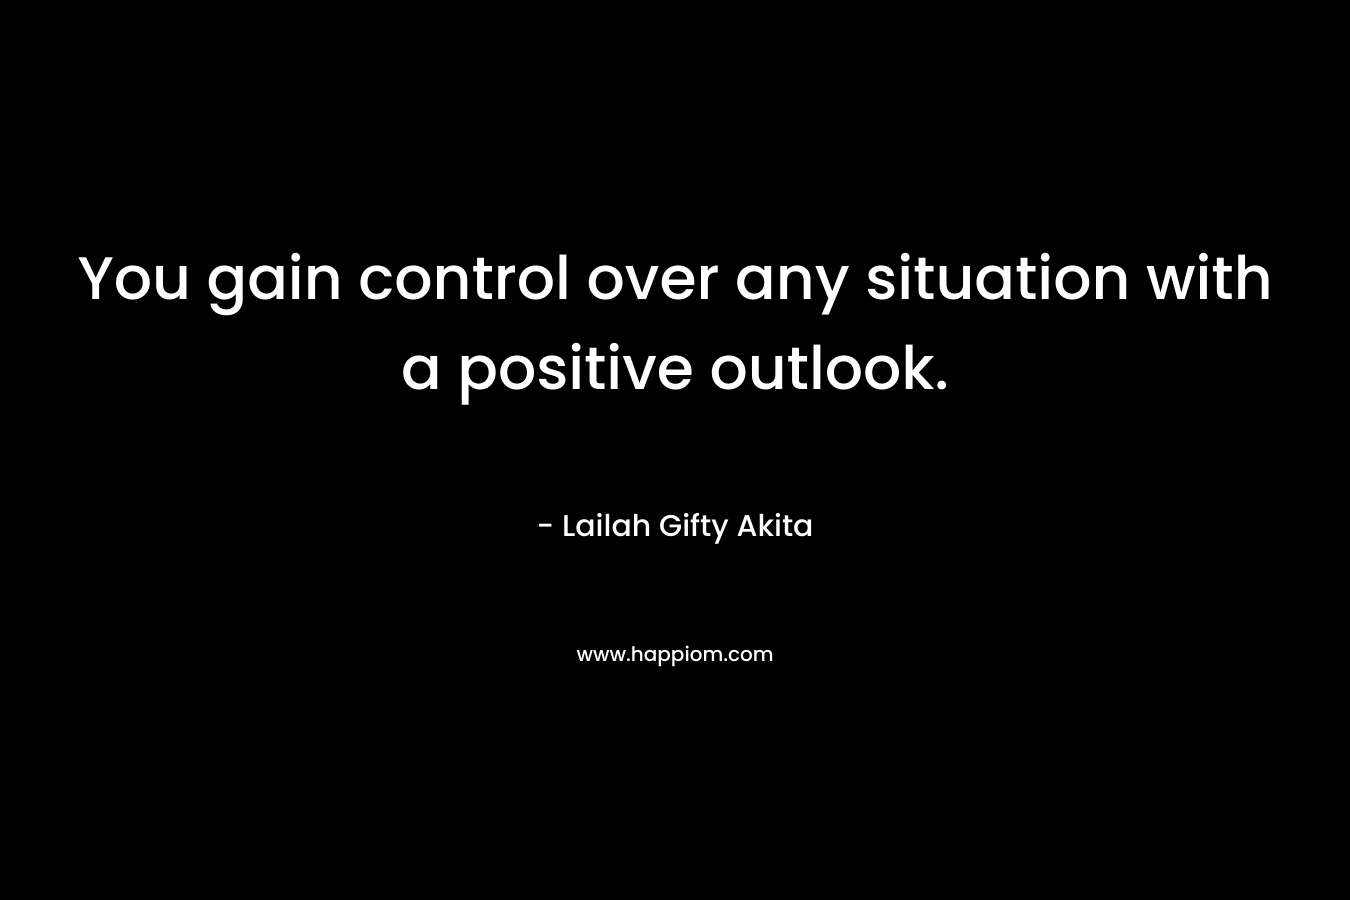 You gain control over any situation with a positive outlook.